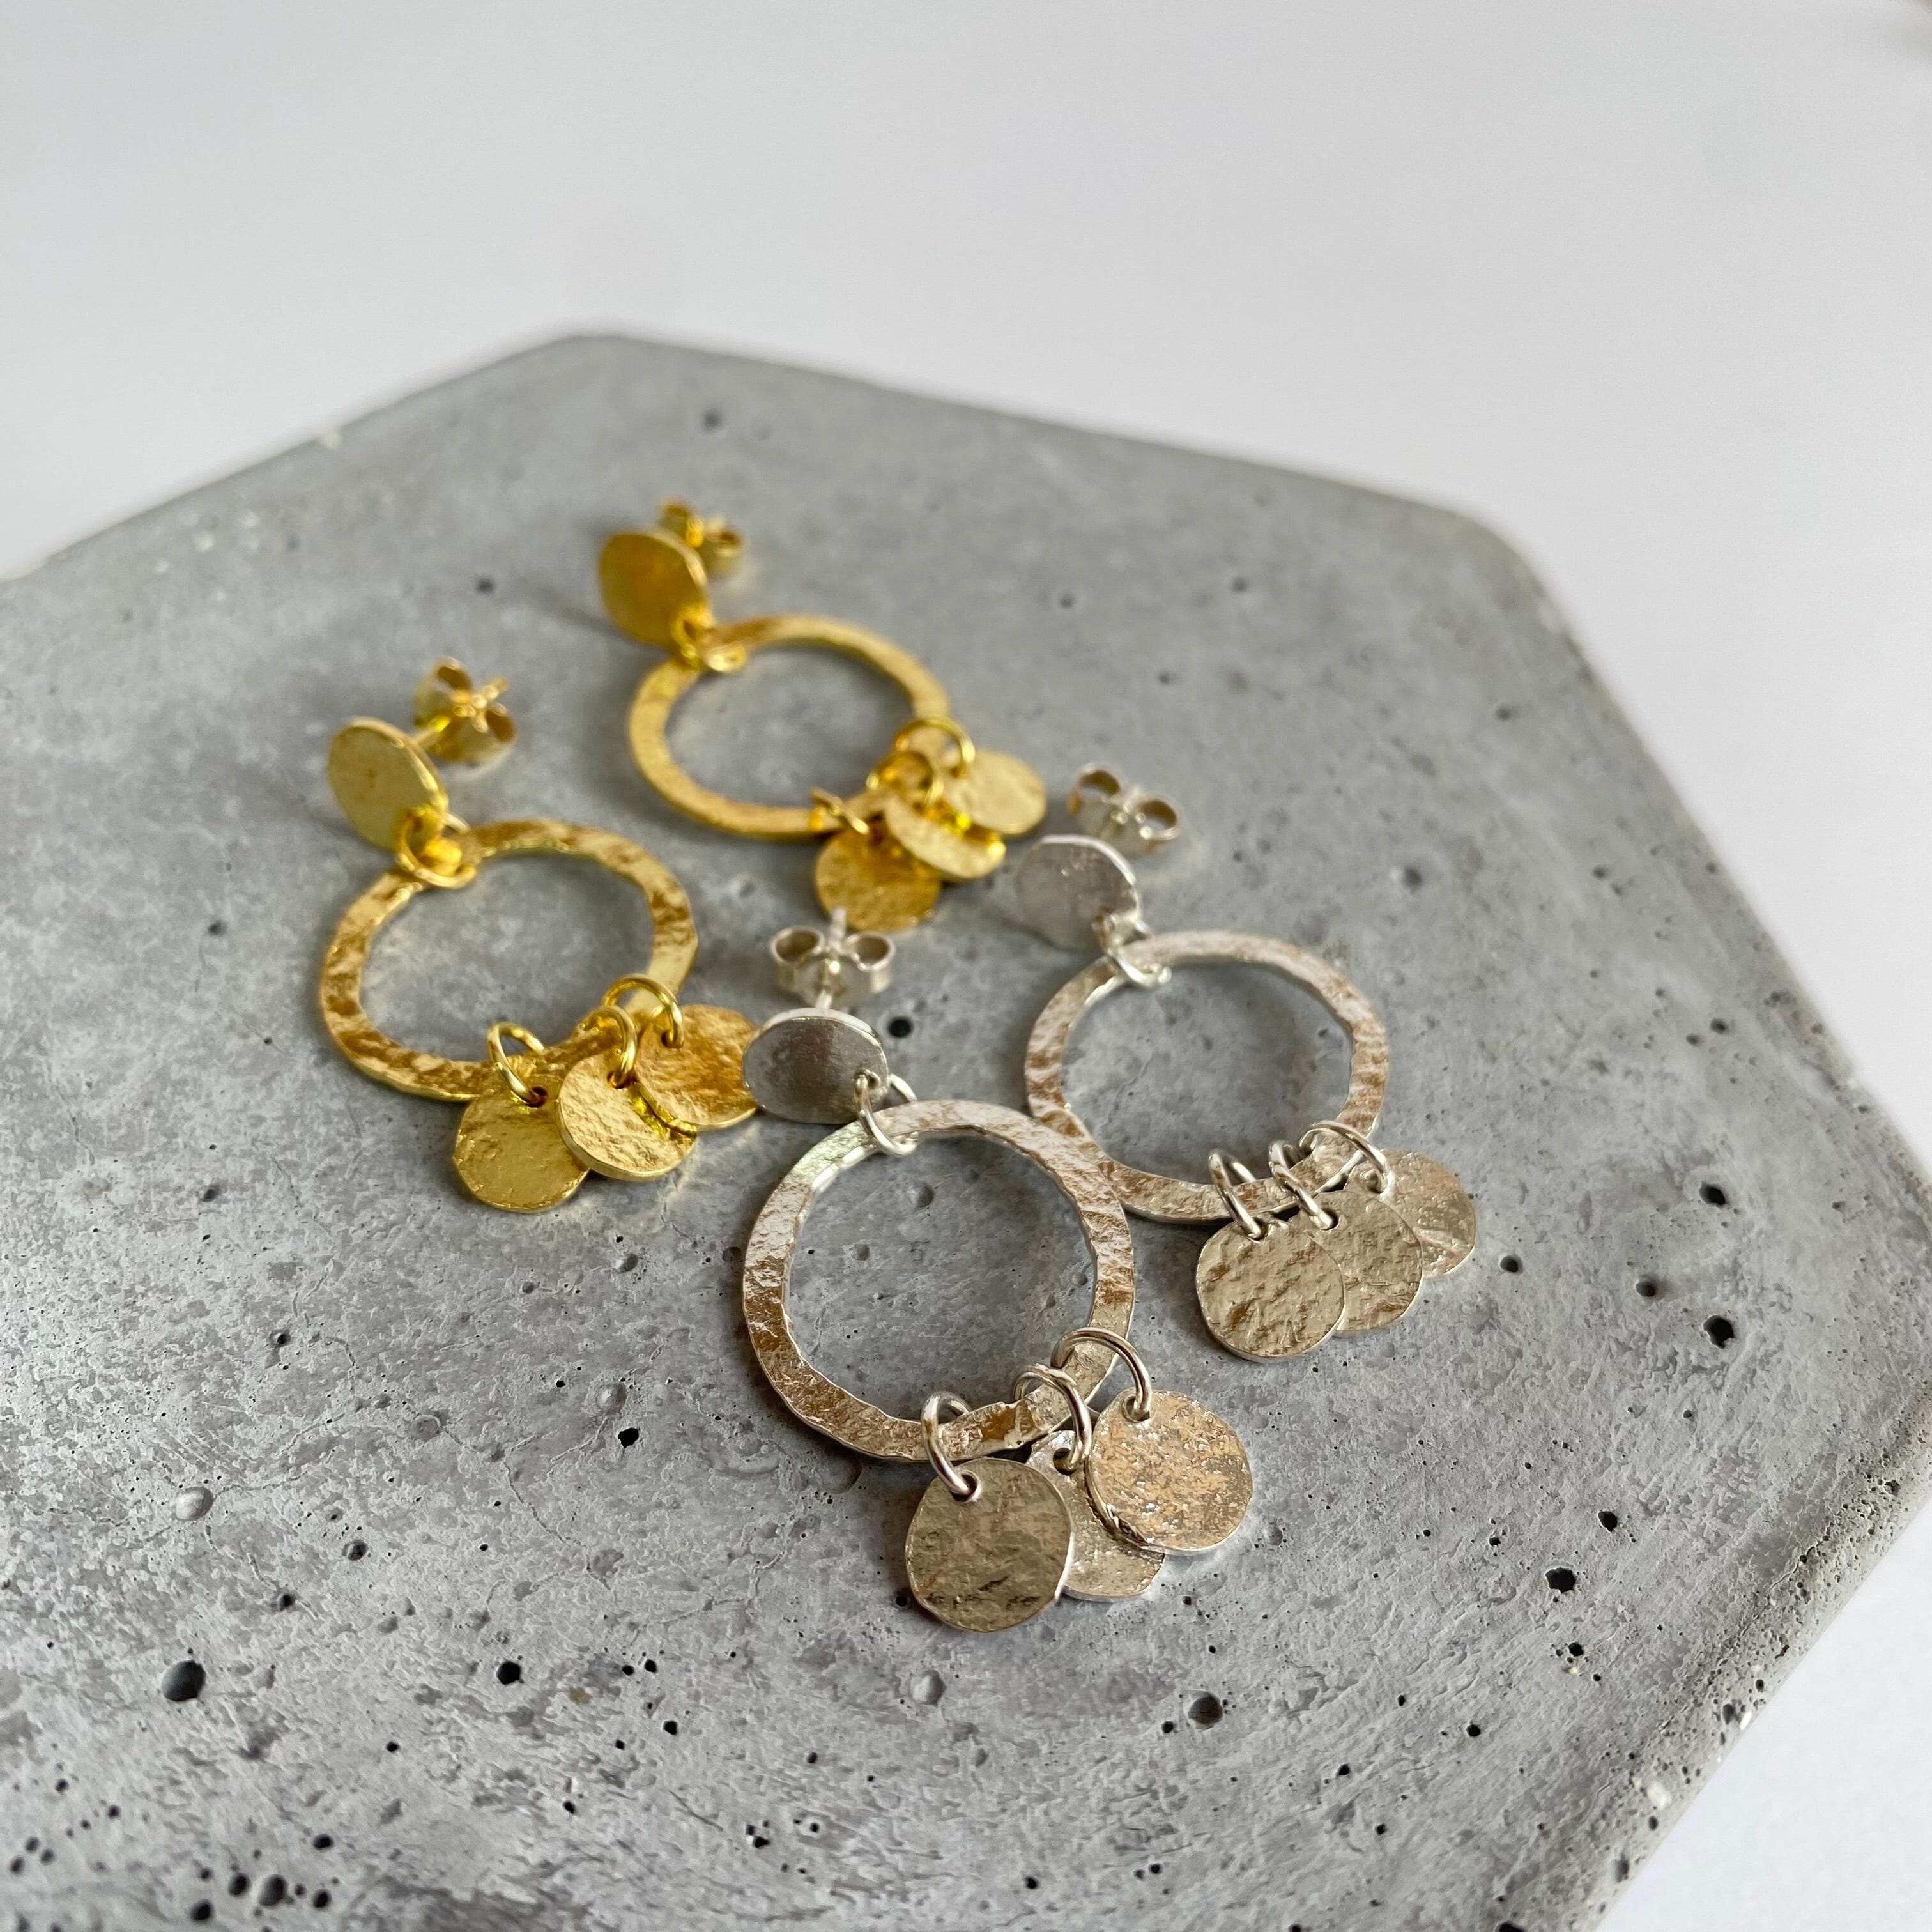 Hammered Collection - Lisa Carney Jewelry Lisa Carney Designs 